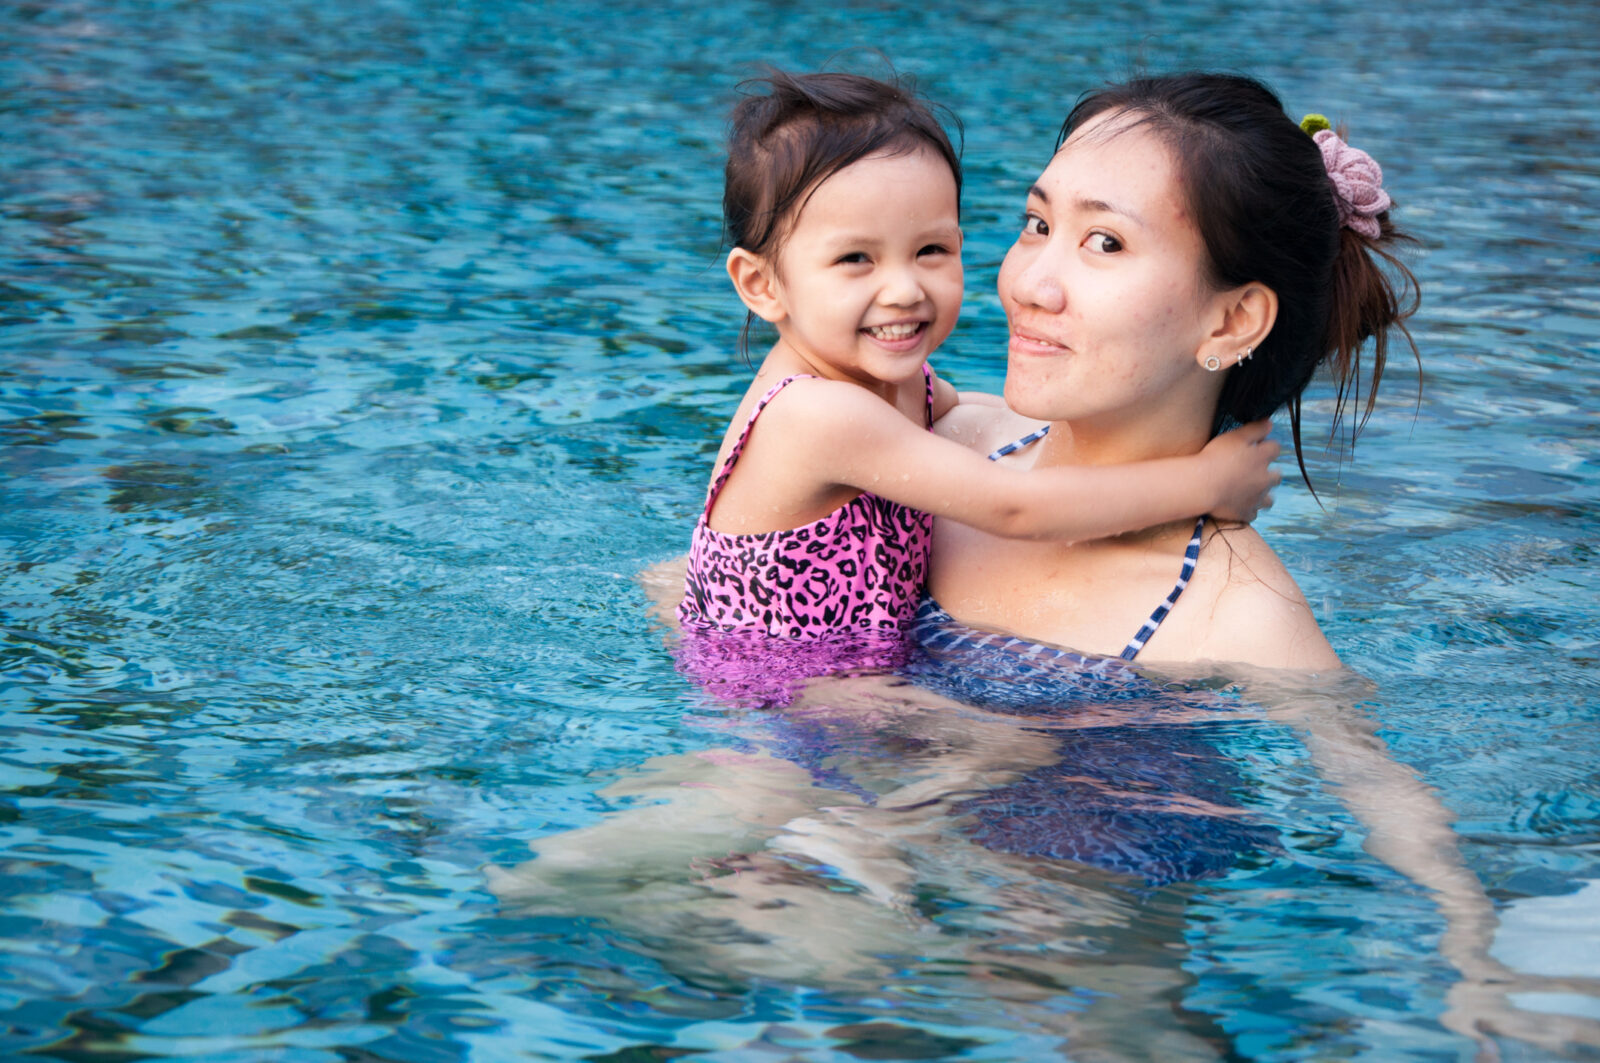 A picture of a young woman having fun and holding a young girl in a swimming pool, to illustrate a post on water safety.